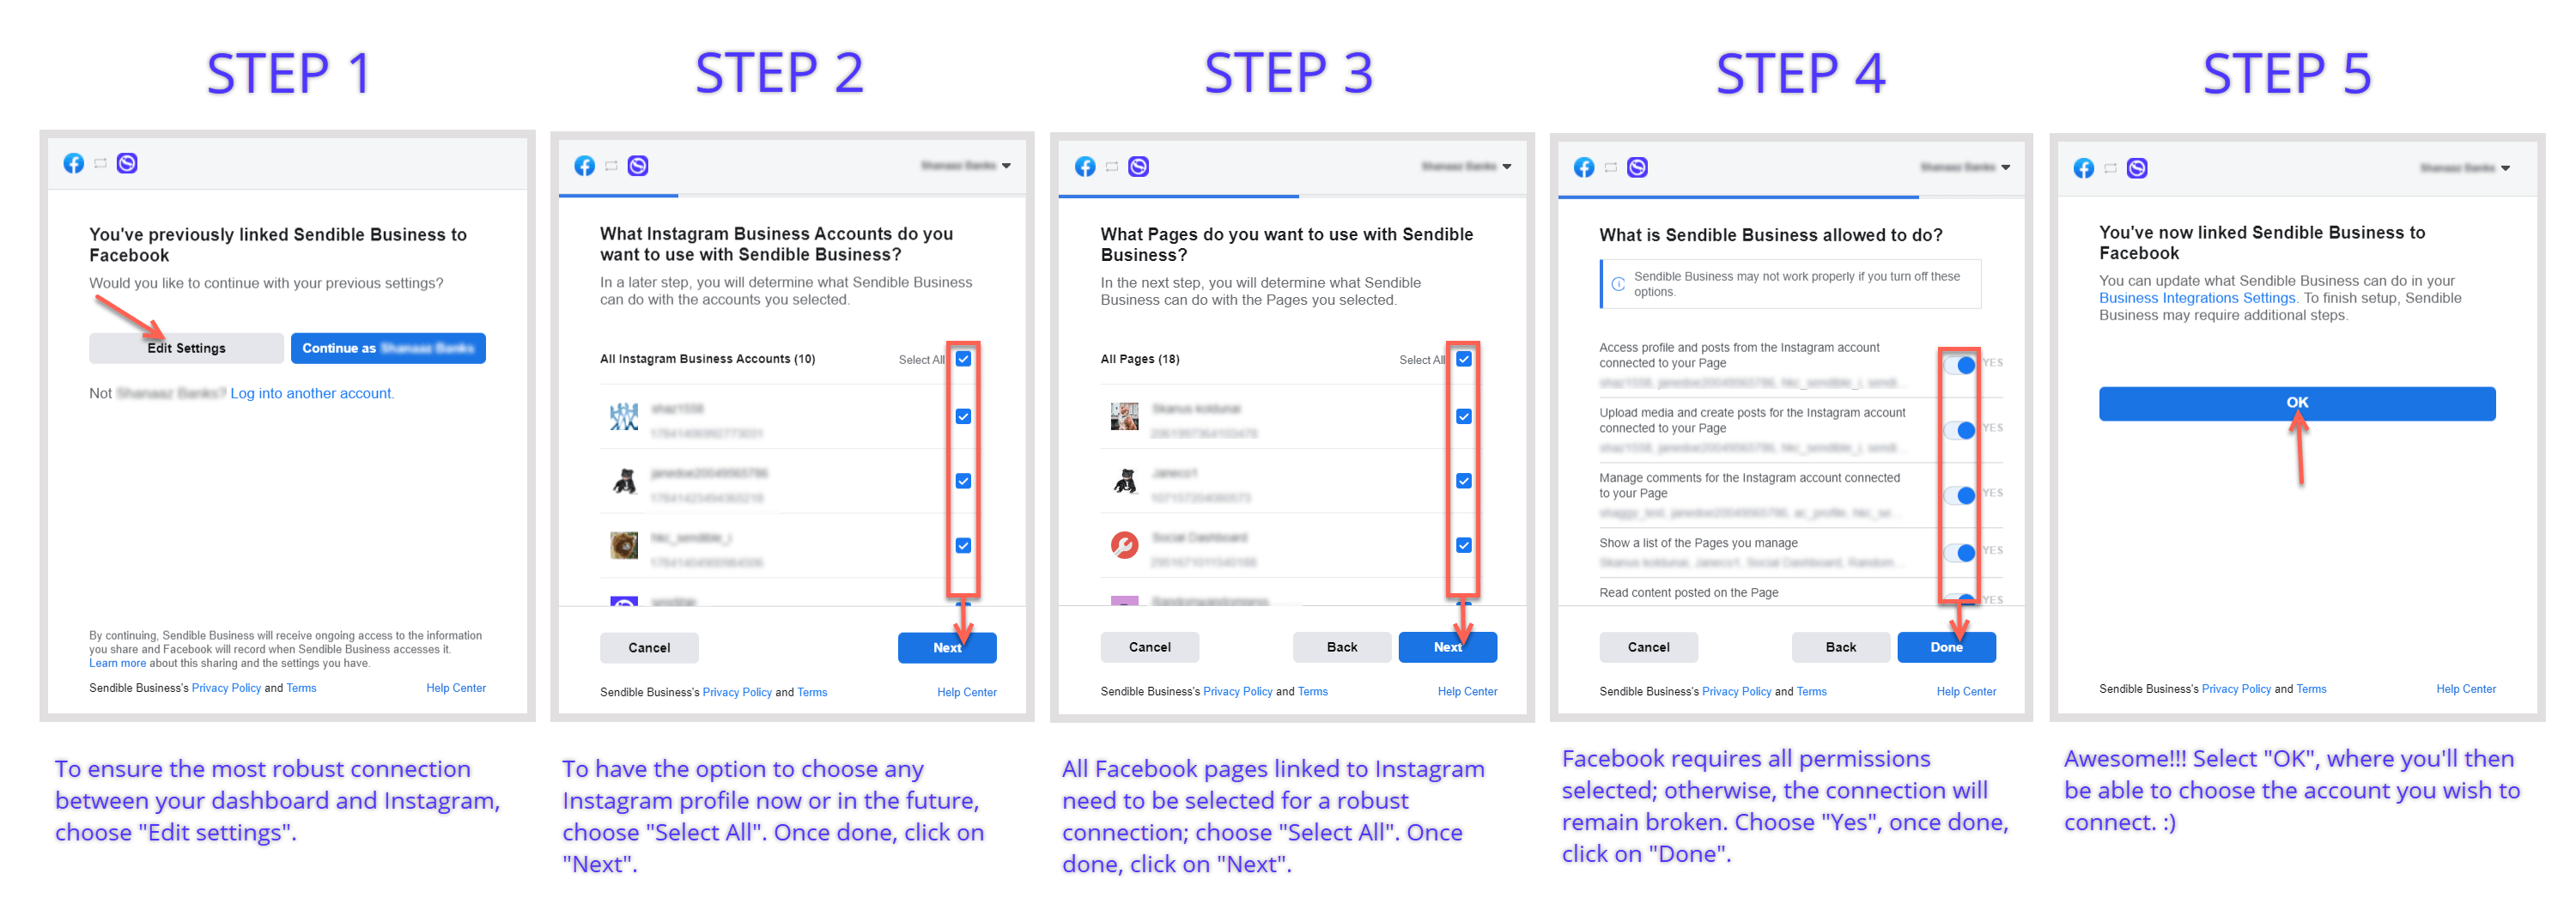 A series of screenshots that show the flow of the Edit Settings window that appears when adding or reconnecting an Instagram Business Profile. All Instagram Business and Facebook Pages are shown with a check mark, confirming their access.